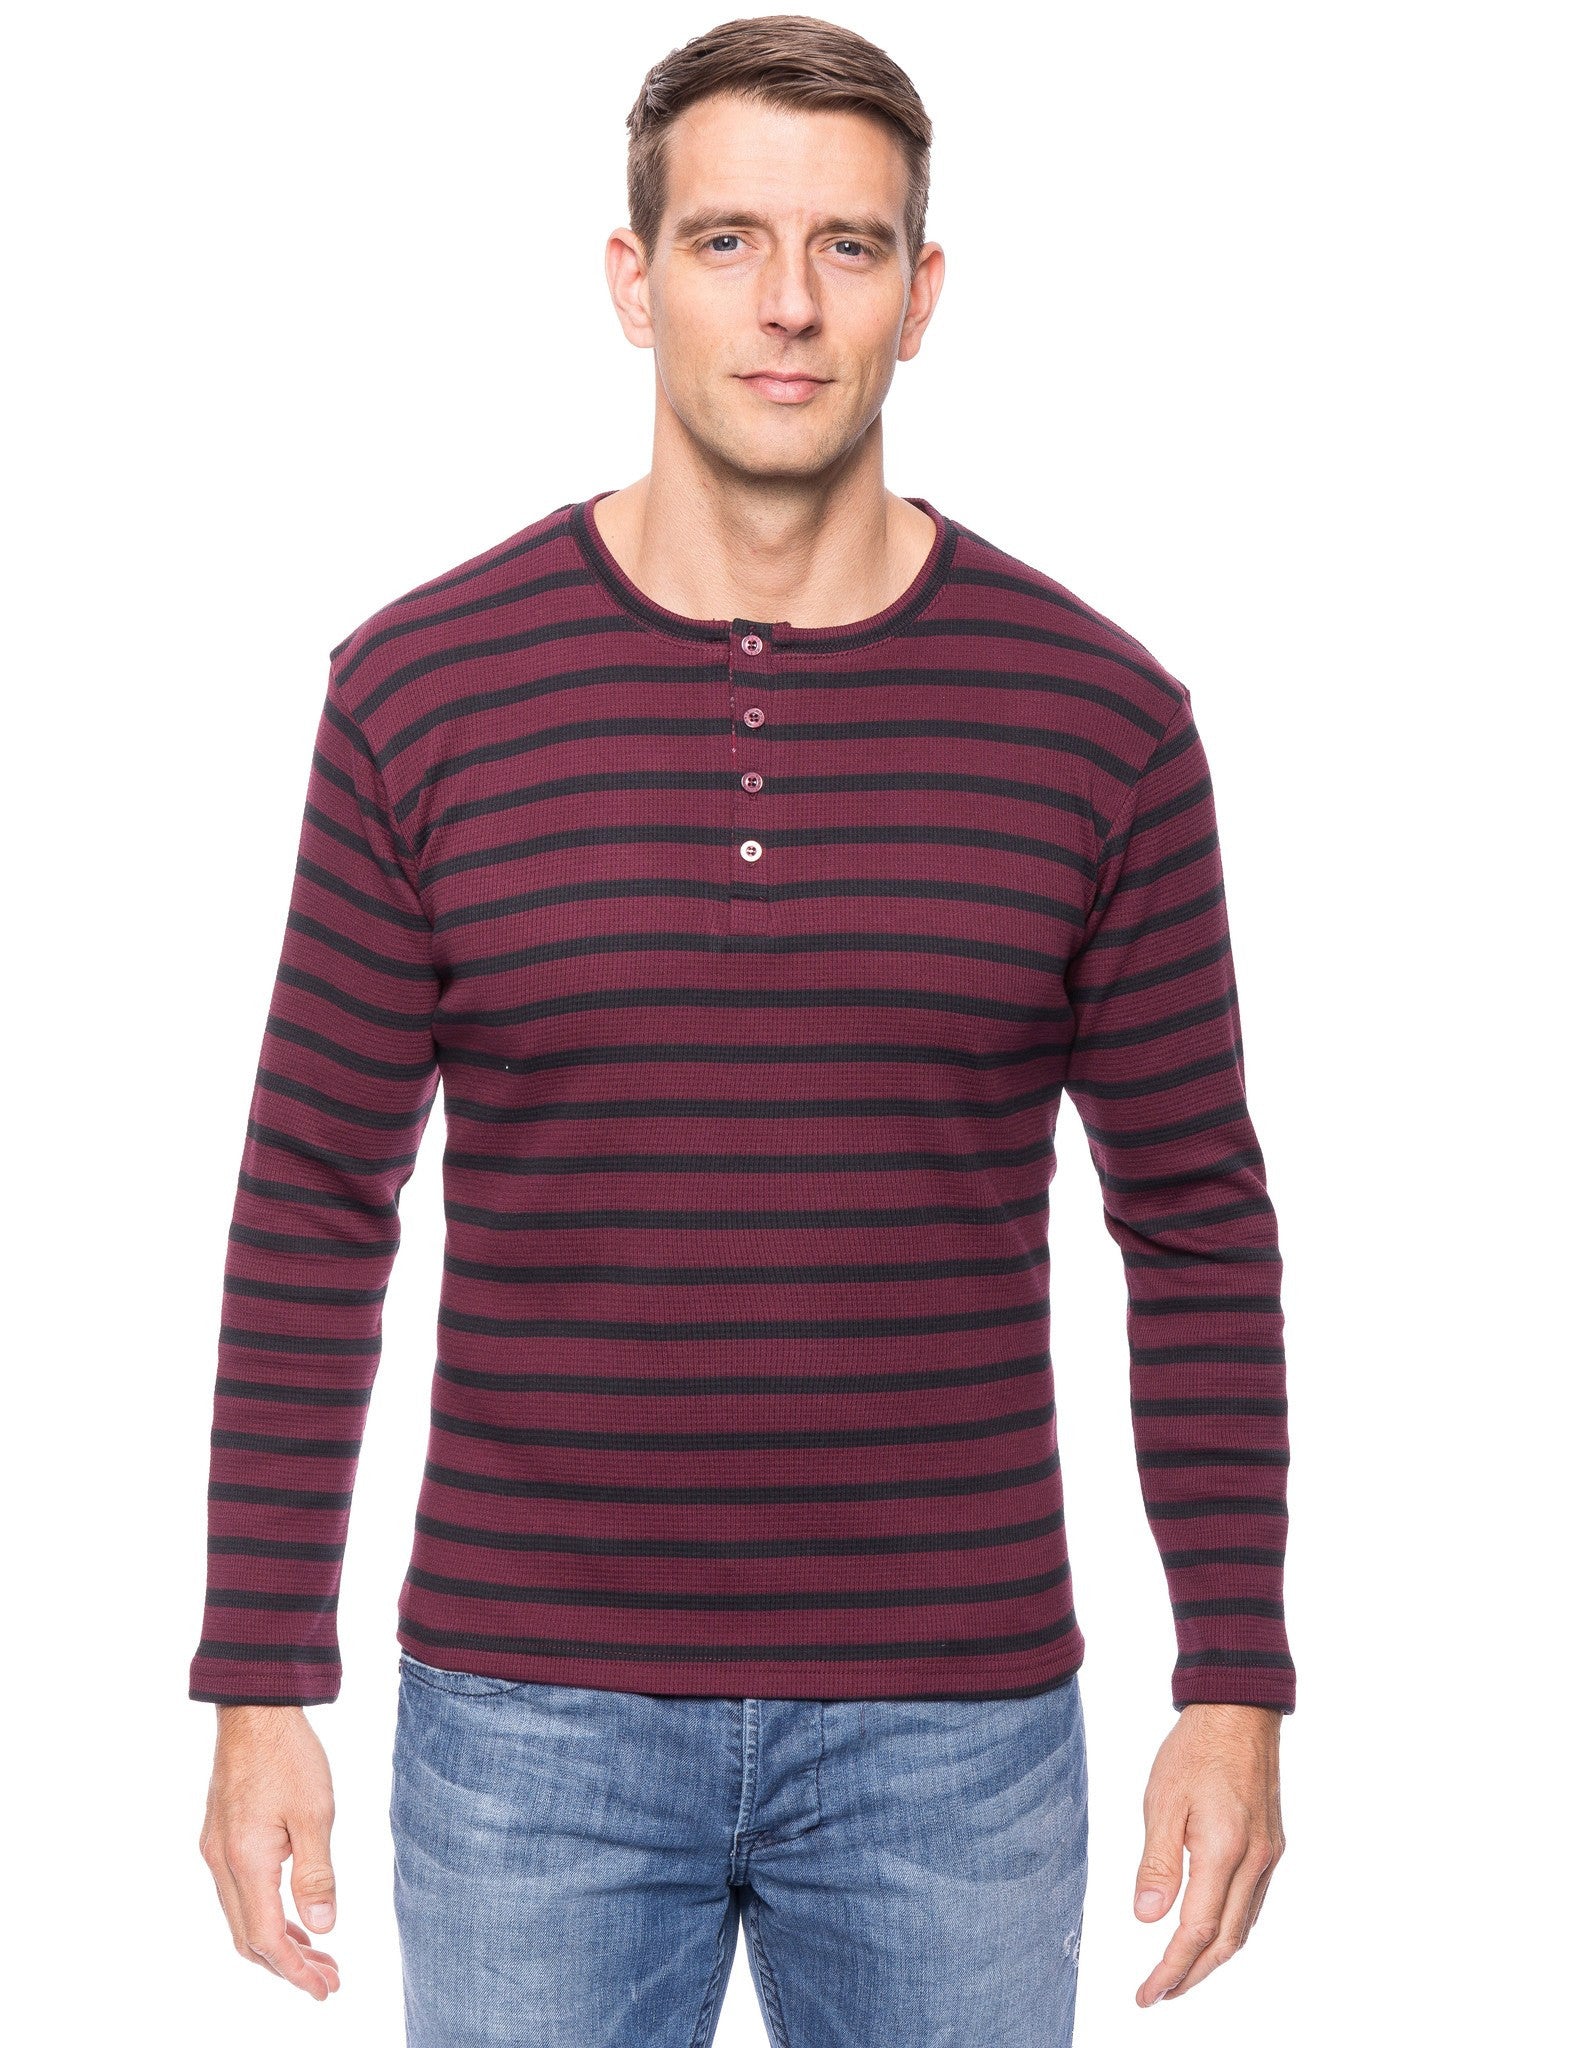 Men's Solid Thermal Henley Long Sleeve T-shirts